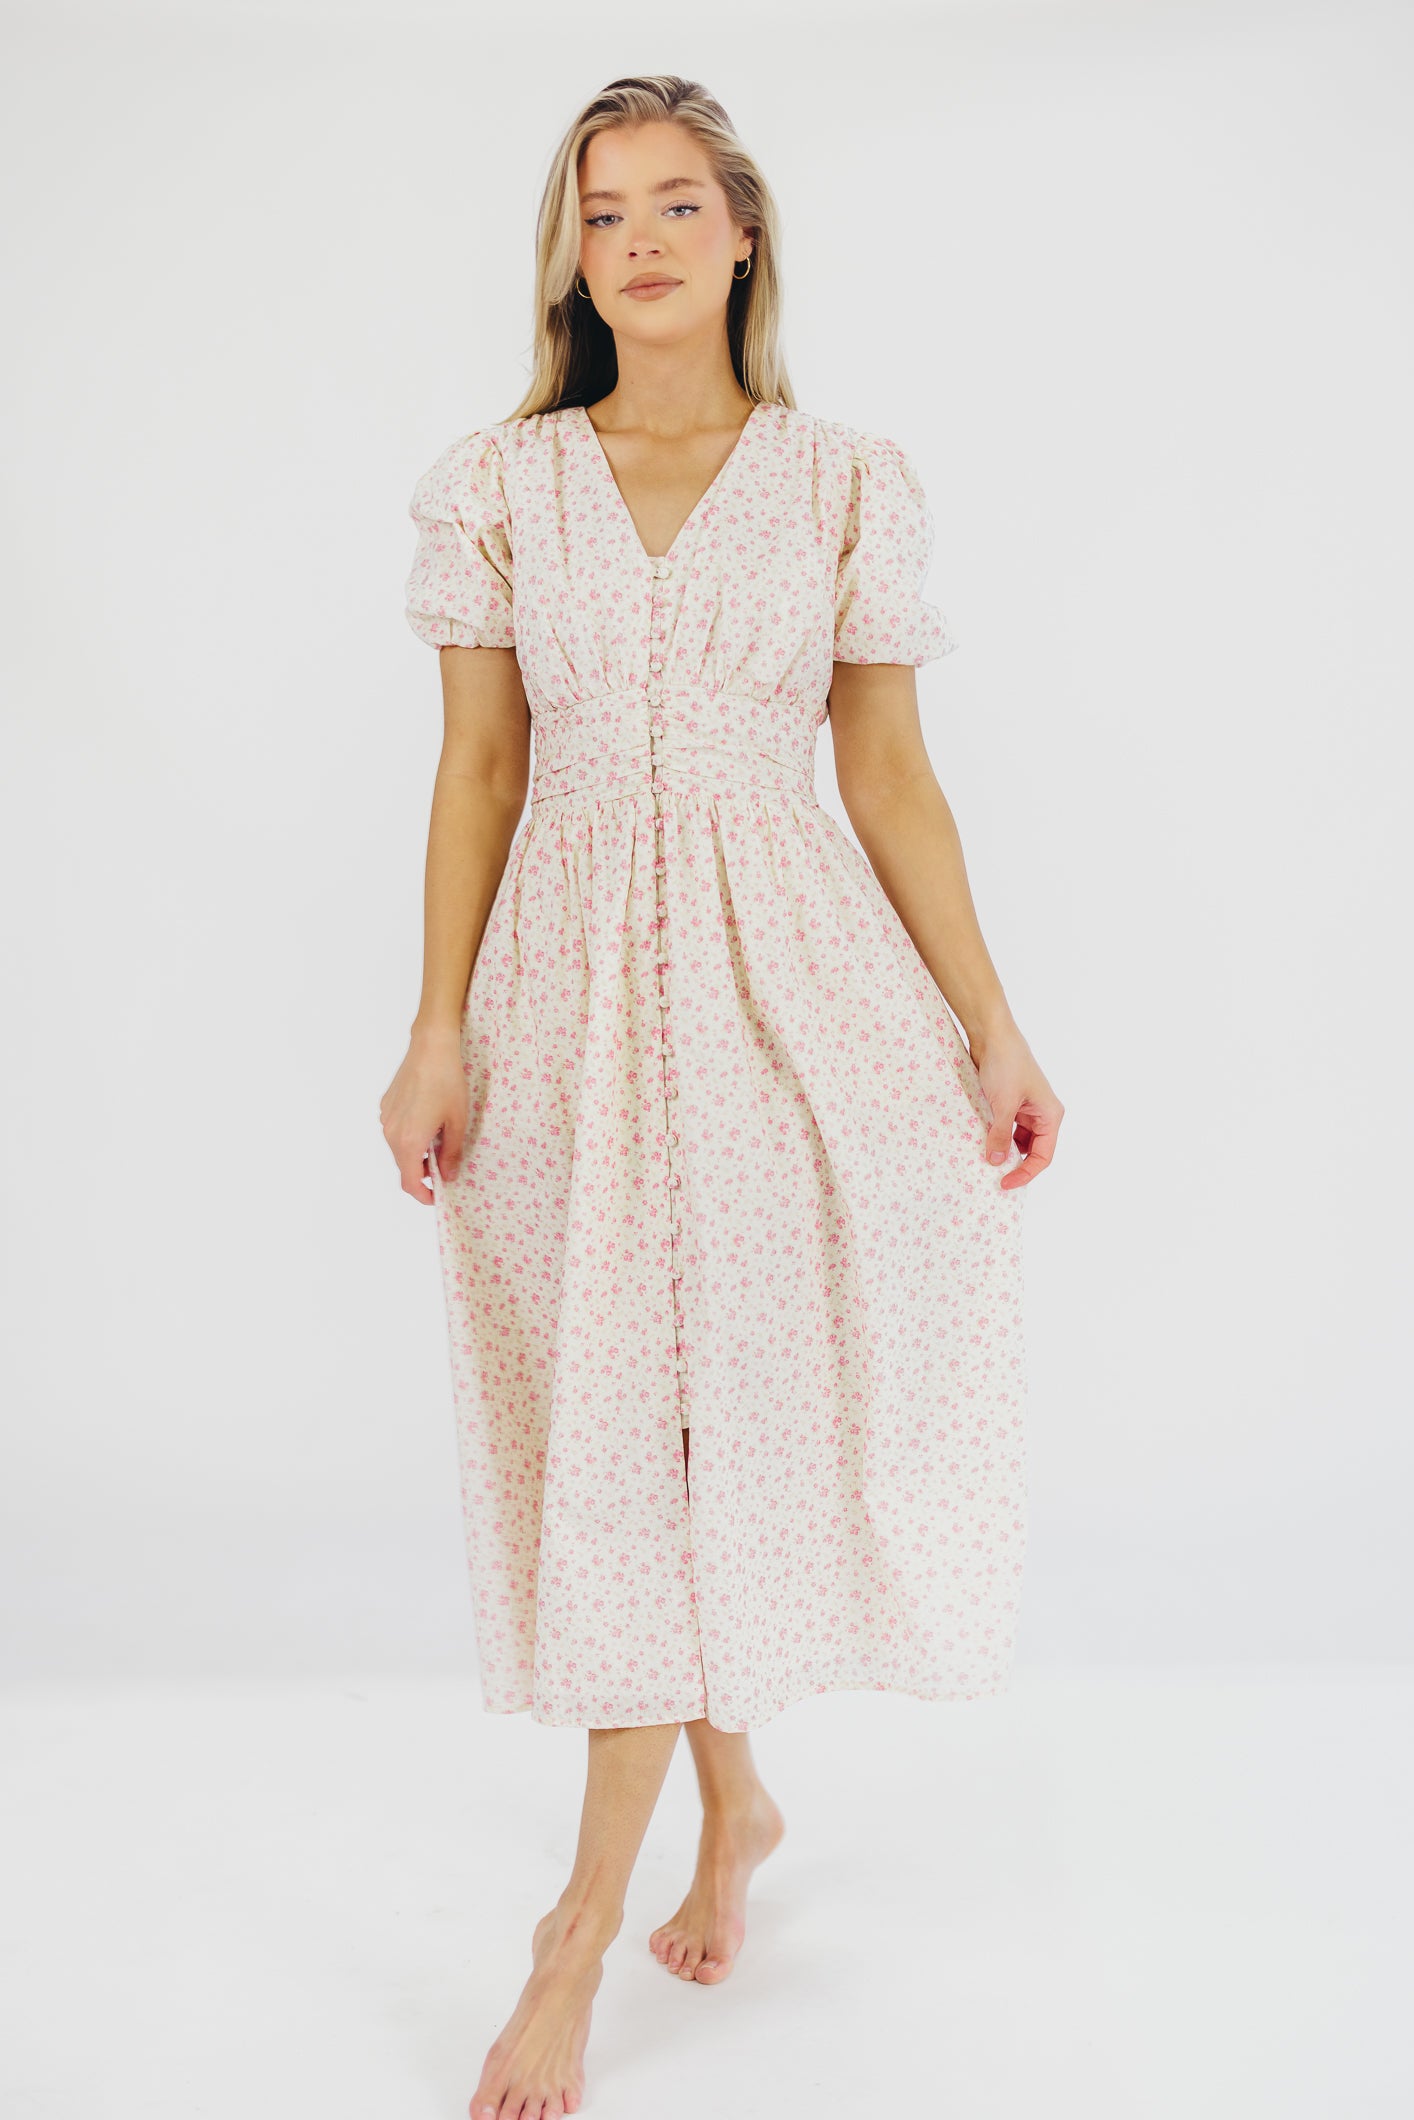 Billie Pleated Maxi Dress in White Pink Floral - Bump Friendly & Inclusive Sizing (S-3XL)